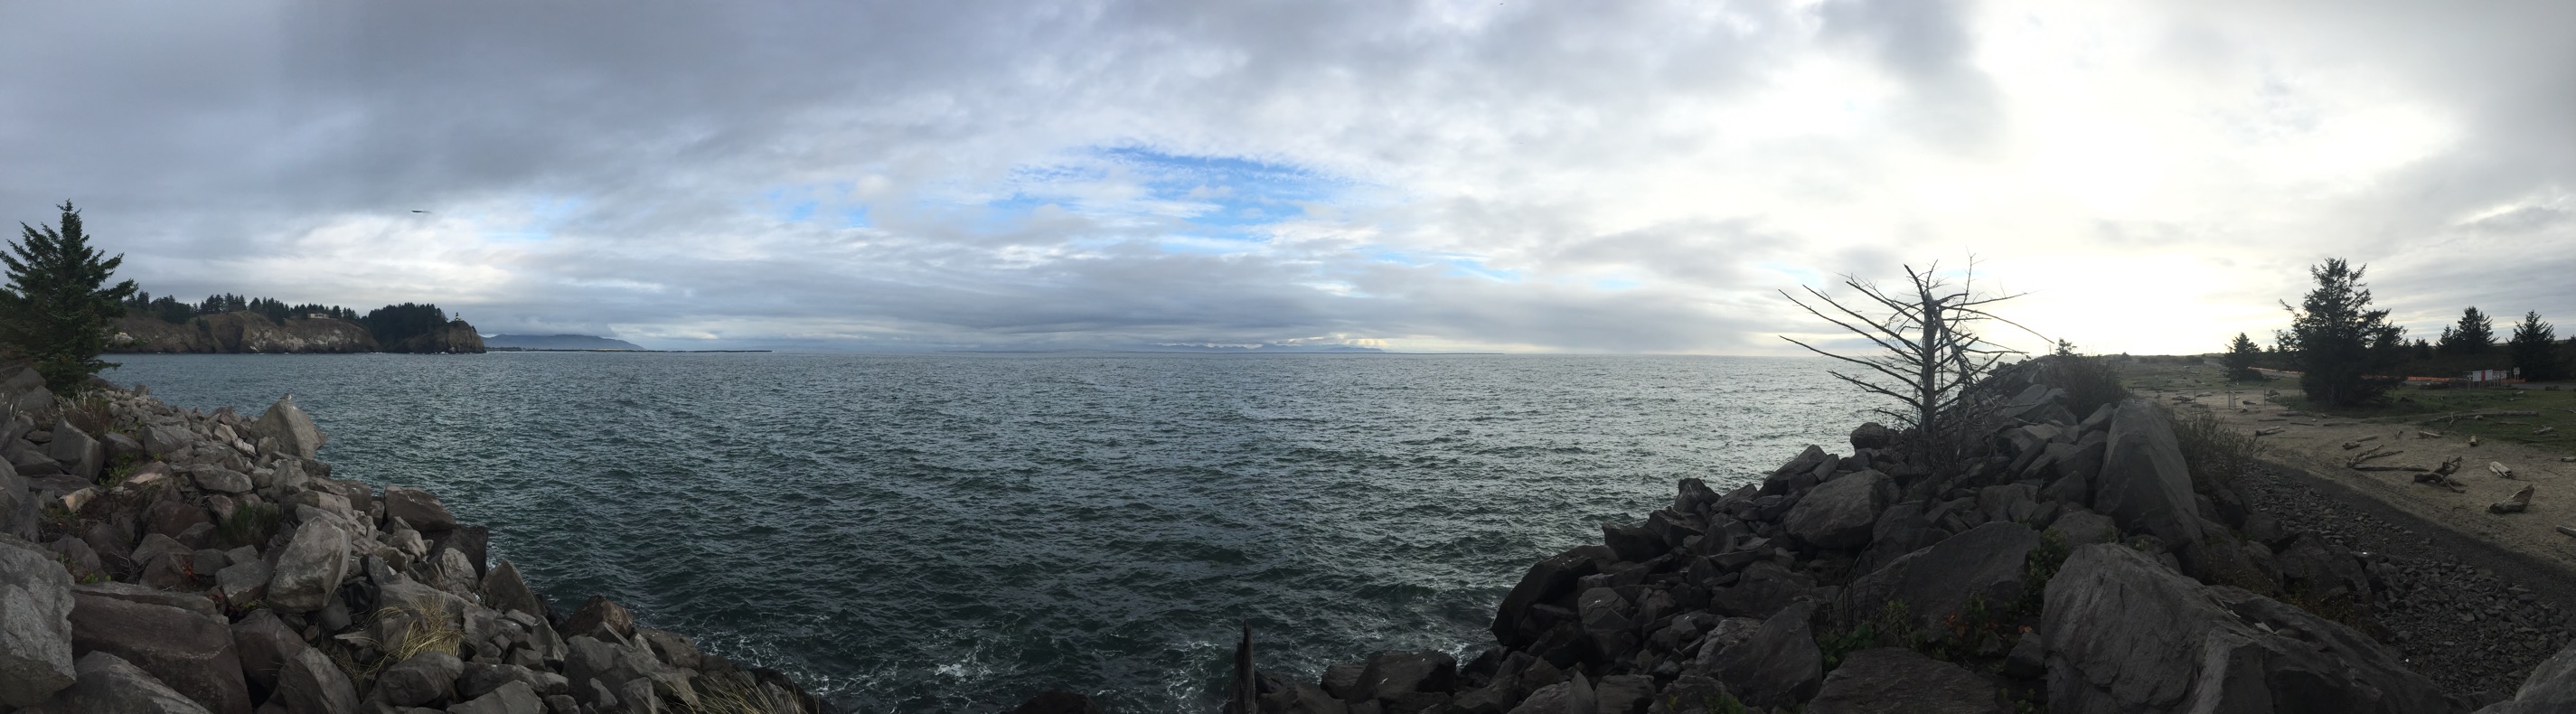 A panorama dominated by the water and overcast sky.